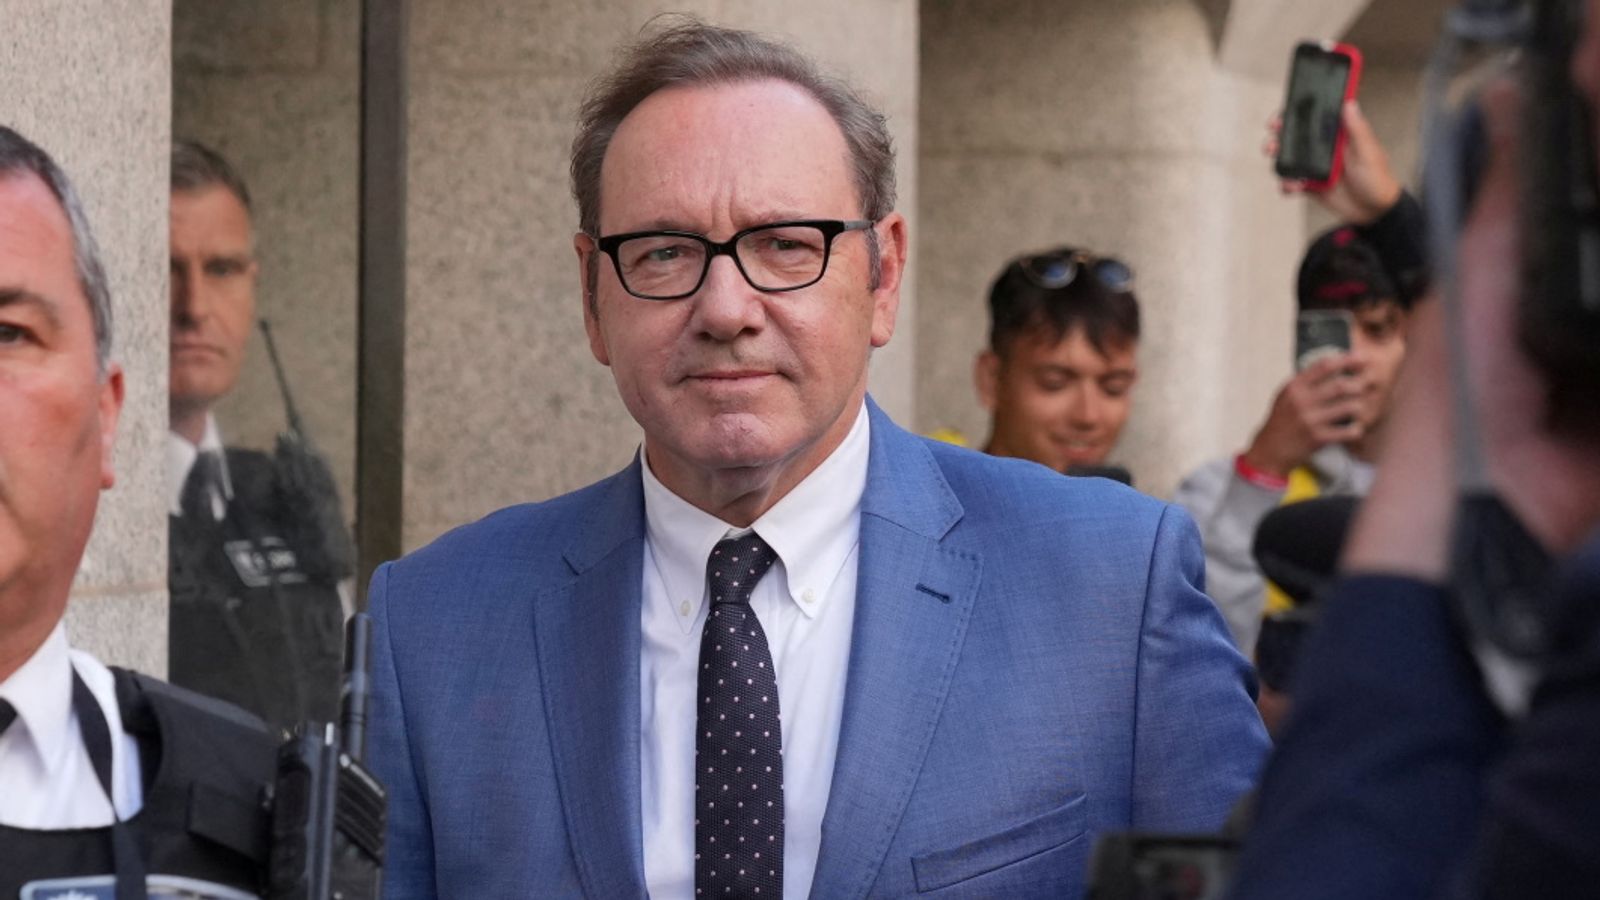 Kevin Spacey appears in court via video link as UK trial date set for sexual offence charges